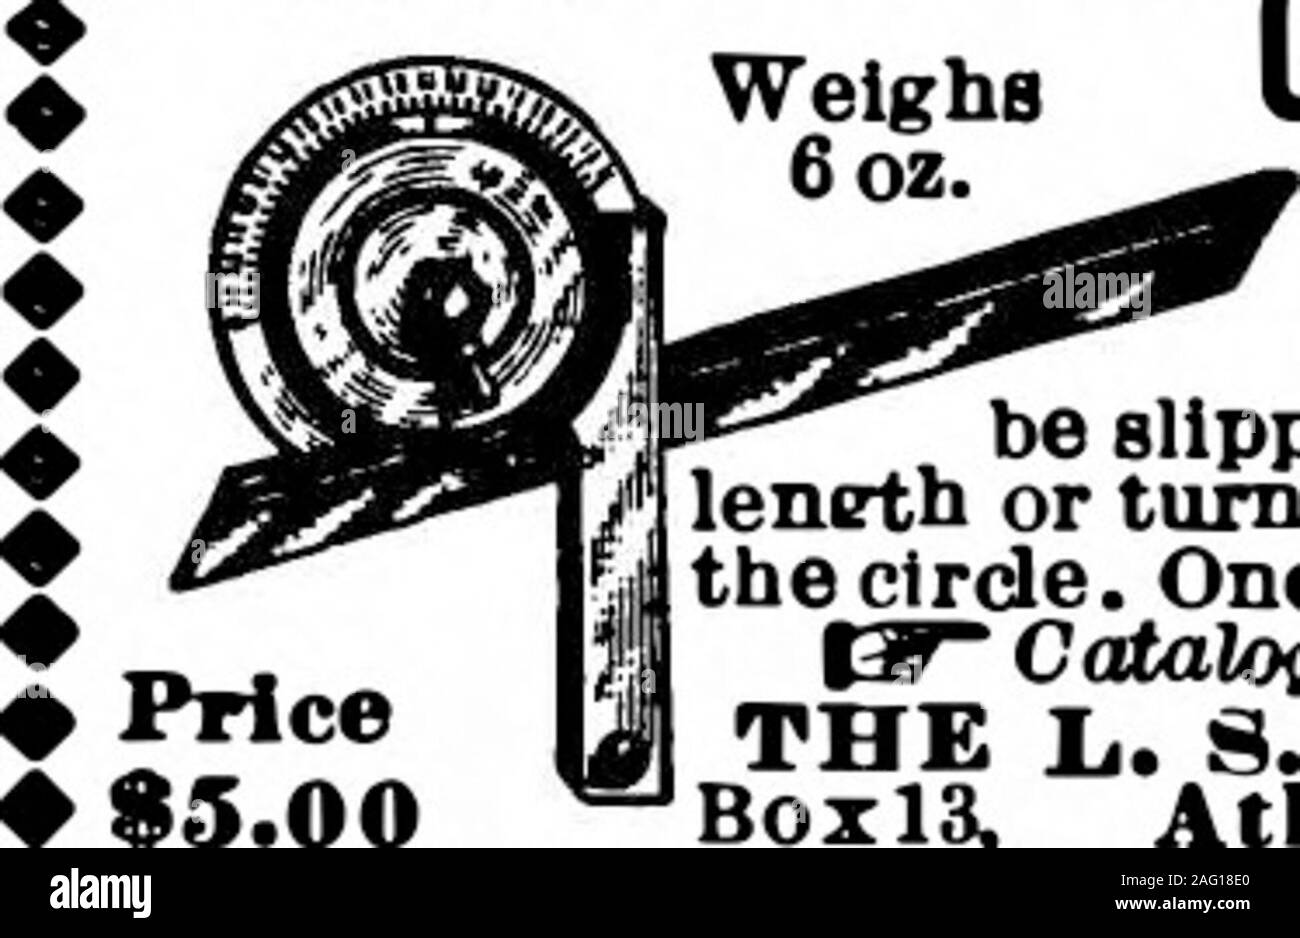 . Scientific American Volume 79 Number 12 (September 1898). ««*««*««««???«?«««««*??«???• Weighs Universal Bevel 1Protractor. I ^ Blade 7 in. long, may abe slipped back and forth full Ileneth or turned at any ancle around Tthe circle. One side of the tool Is flat. J|y Catalogue of Fine Tools free. ?THE L. S. STARRETT CO. ?Boxl3, Athol, Mass., U. S. A. ?. If you want the best CHUCKS, buy Westcotts Little Giant Doable Grip Drill Chucks, Little Giant Drill Chucks Improved, Oneida Drill Chucks, Cut- ting-ofi Chucks.Scroll CombinationLathe Chucks, GearedCombination Lathe Chucks, PlainChucks, Indepen Stock Photo